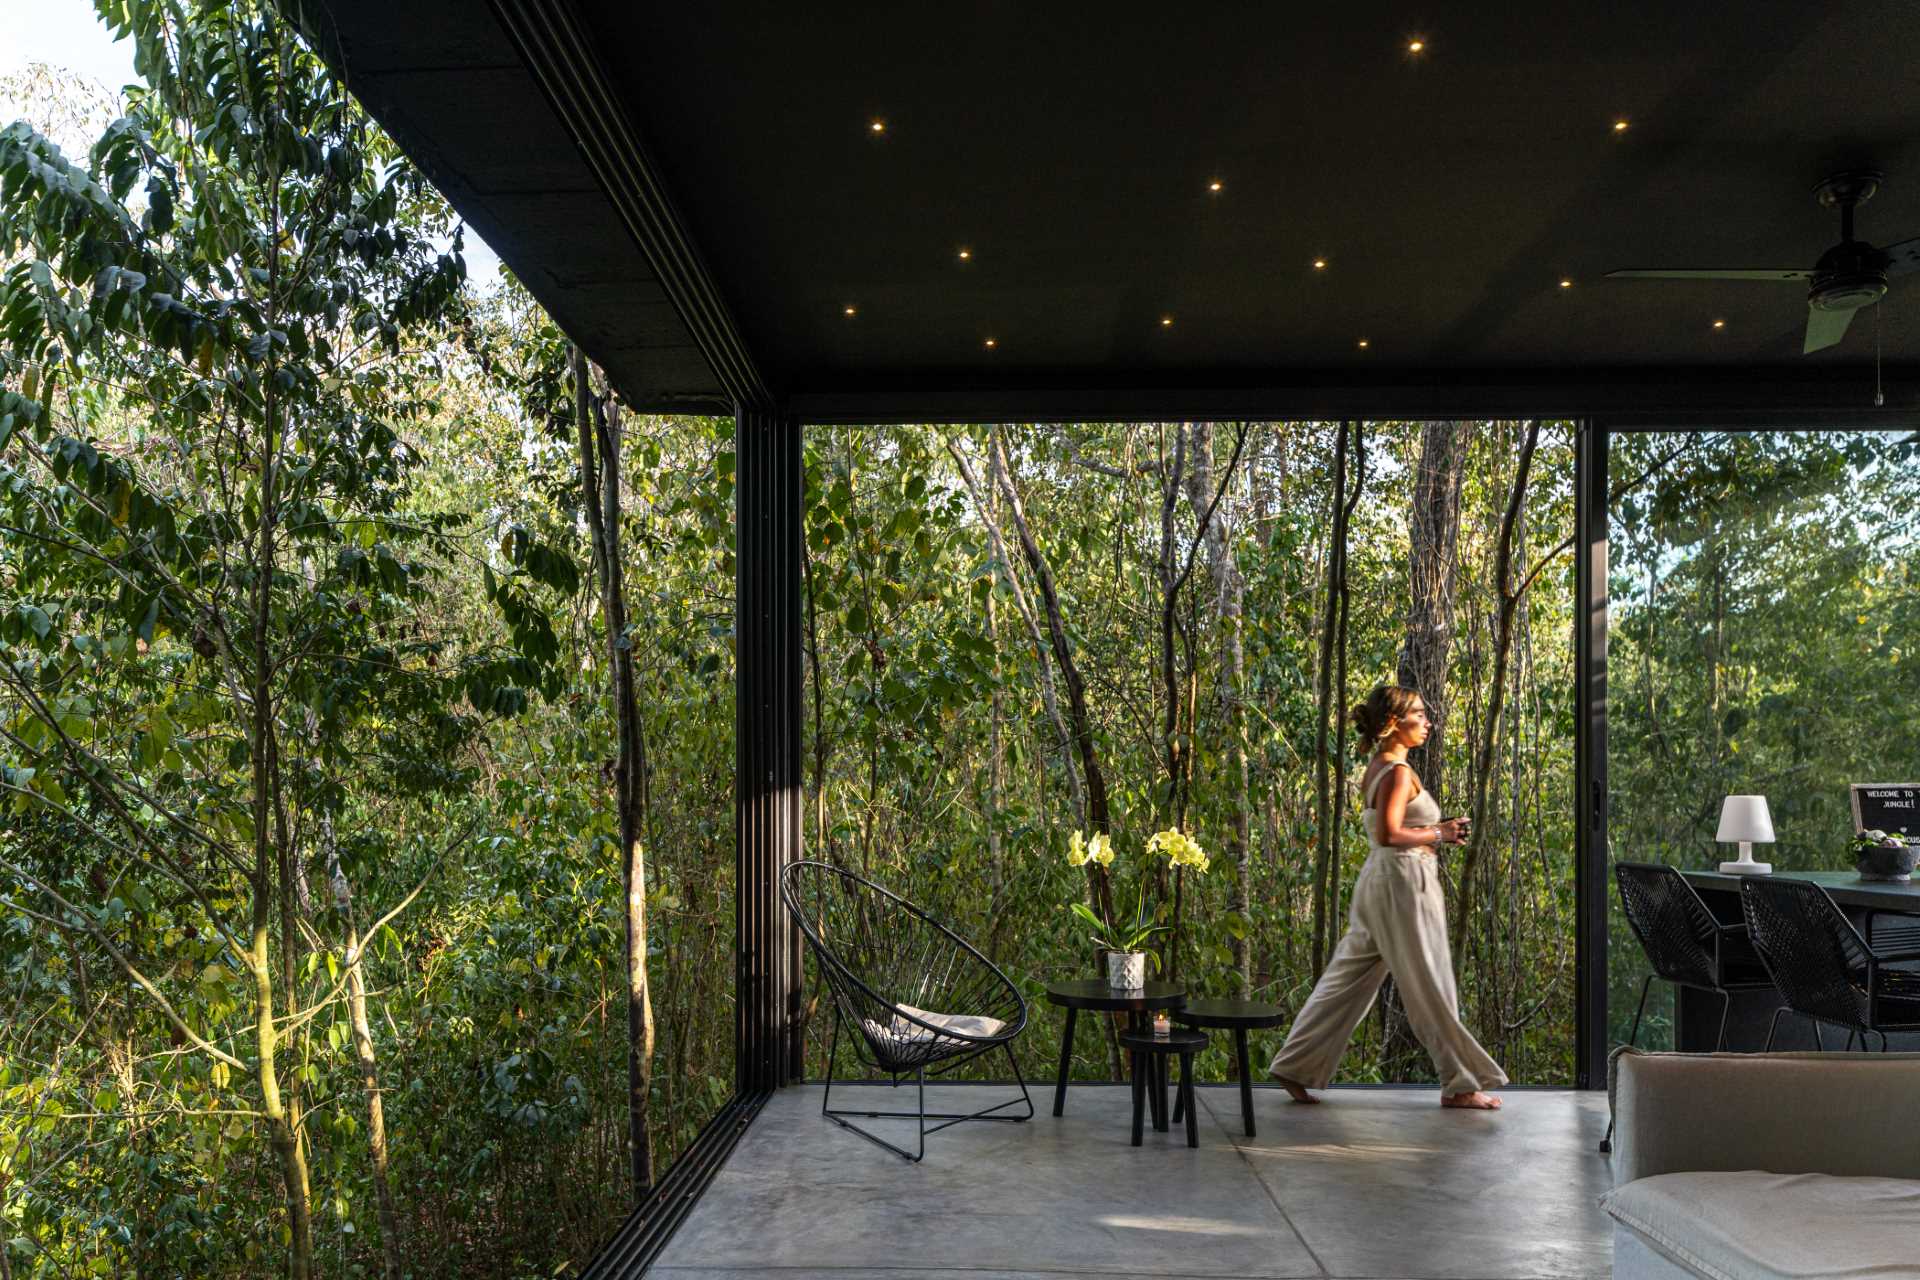 All spaces of these off-grid cabins fully open up to views of the lush flora and fauna of the Mayan jungle, facilitating cross ventilation from any point.